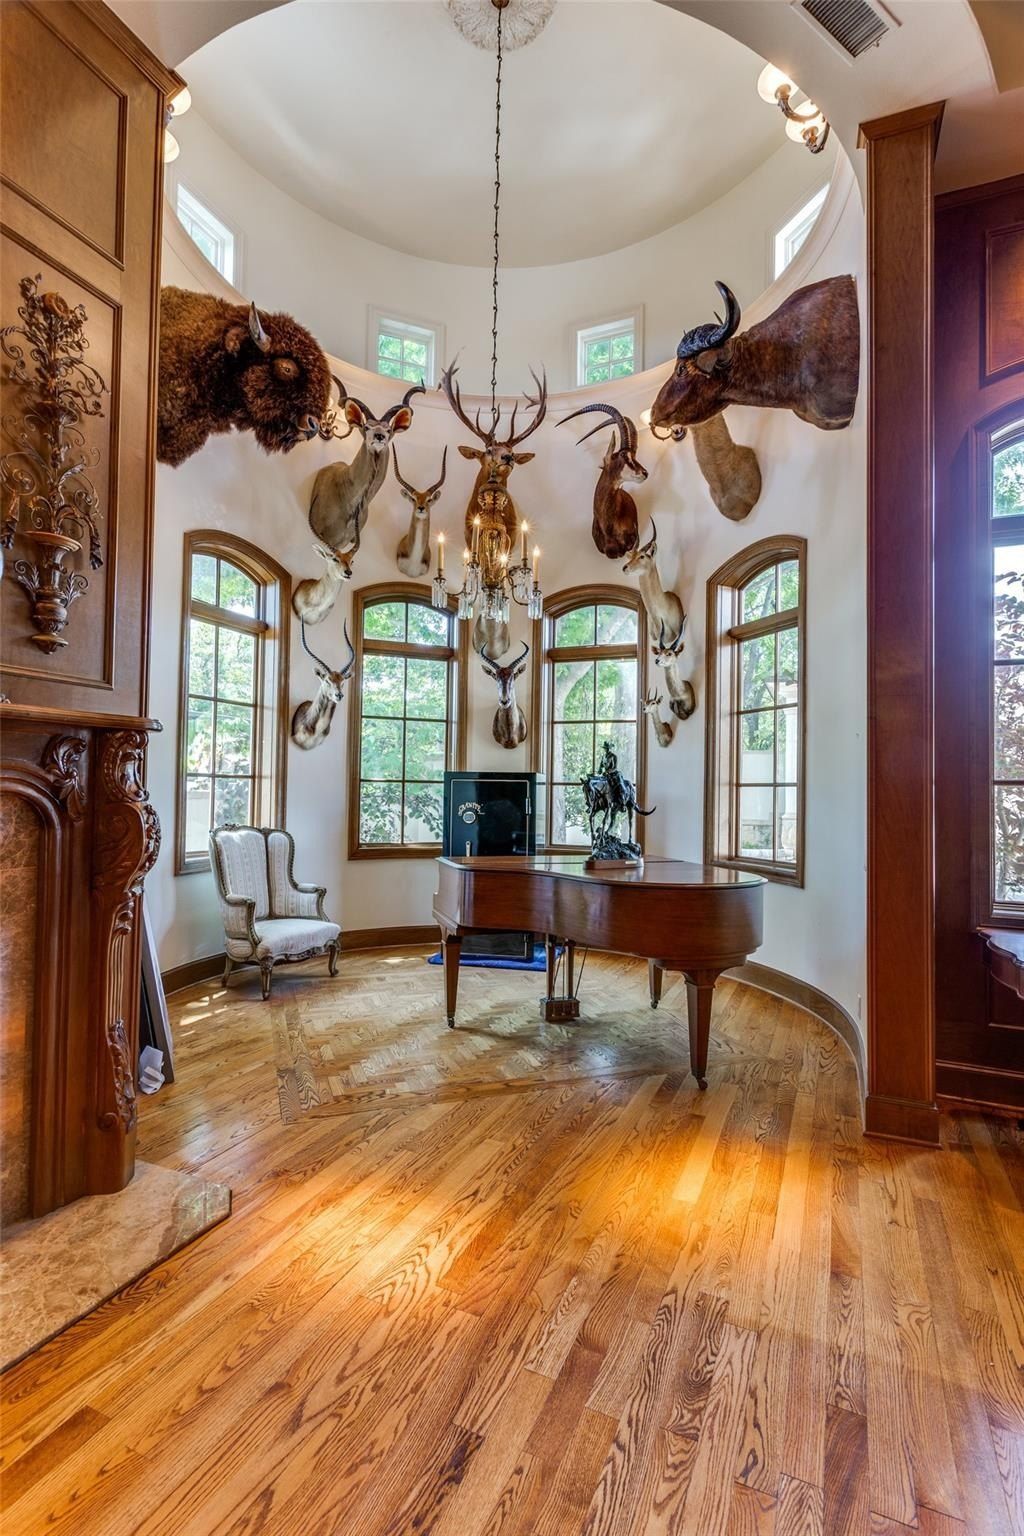 Elegant french chateau captivating mira vista estate in fort worth texas now available for 3. 95 million 20